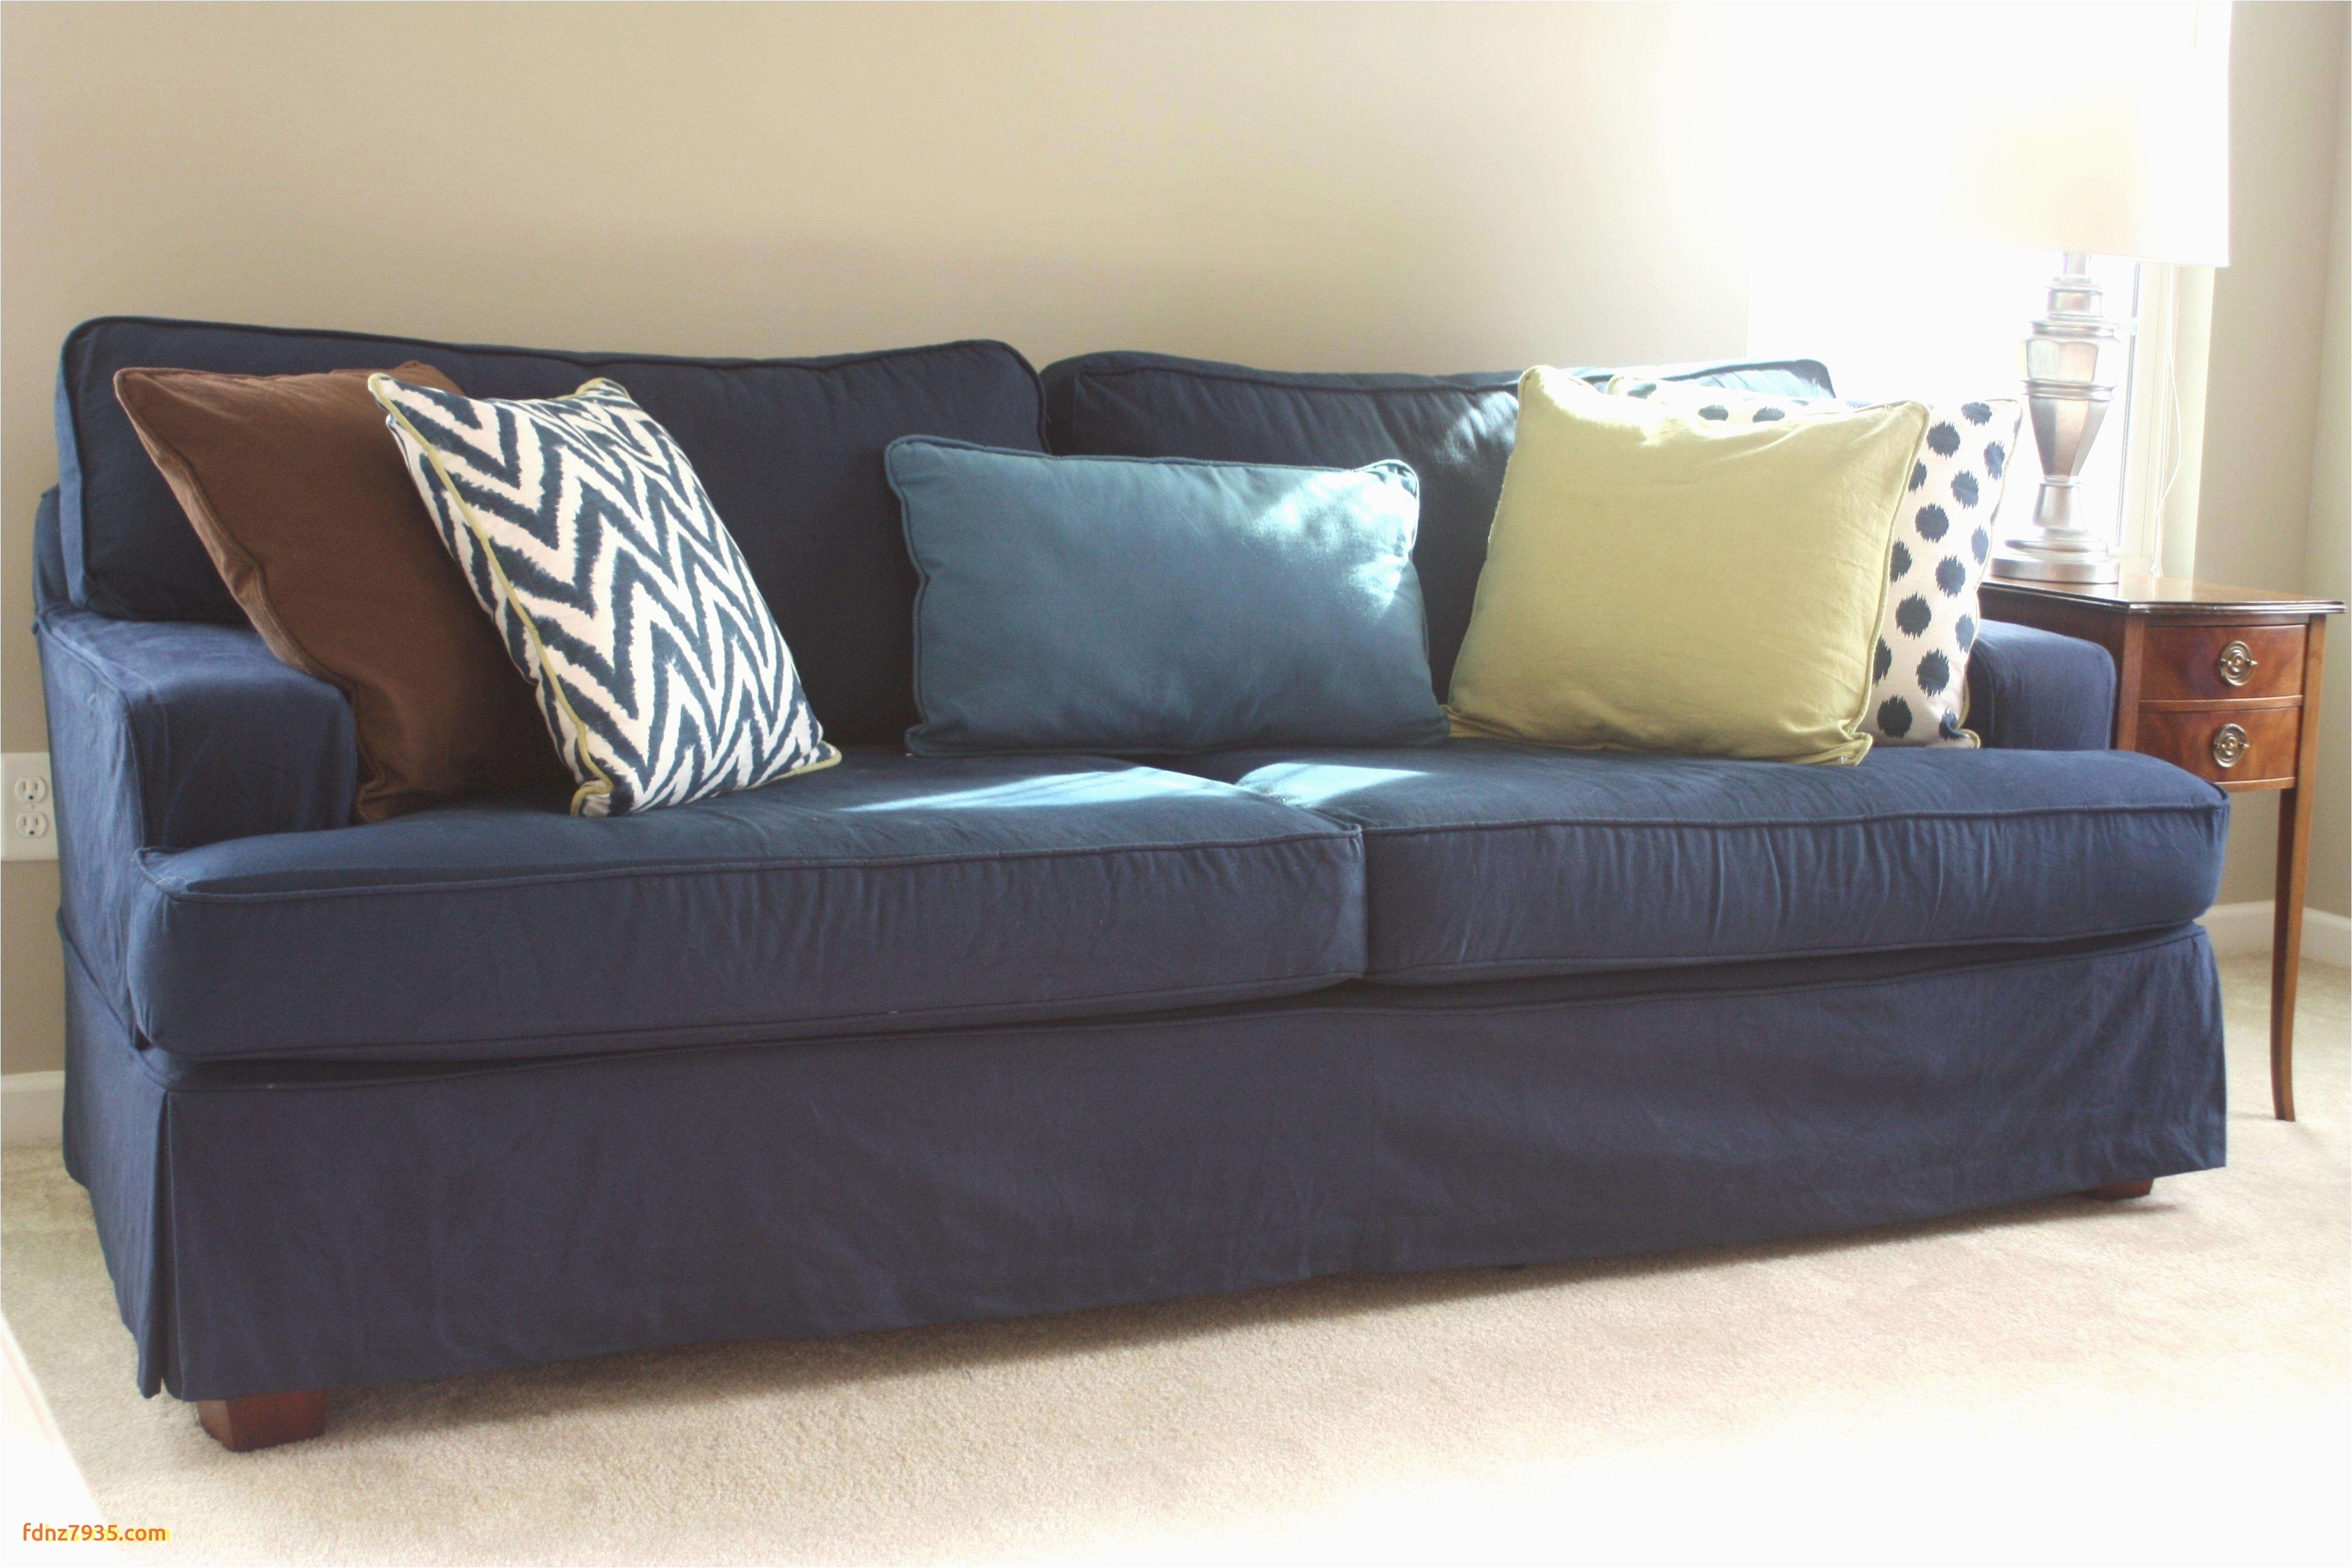 full size of furniture leather sectional couch awesome furniture leather loveseats awesome navy loveseat 0d